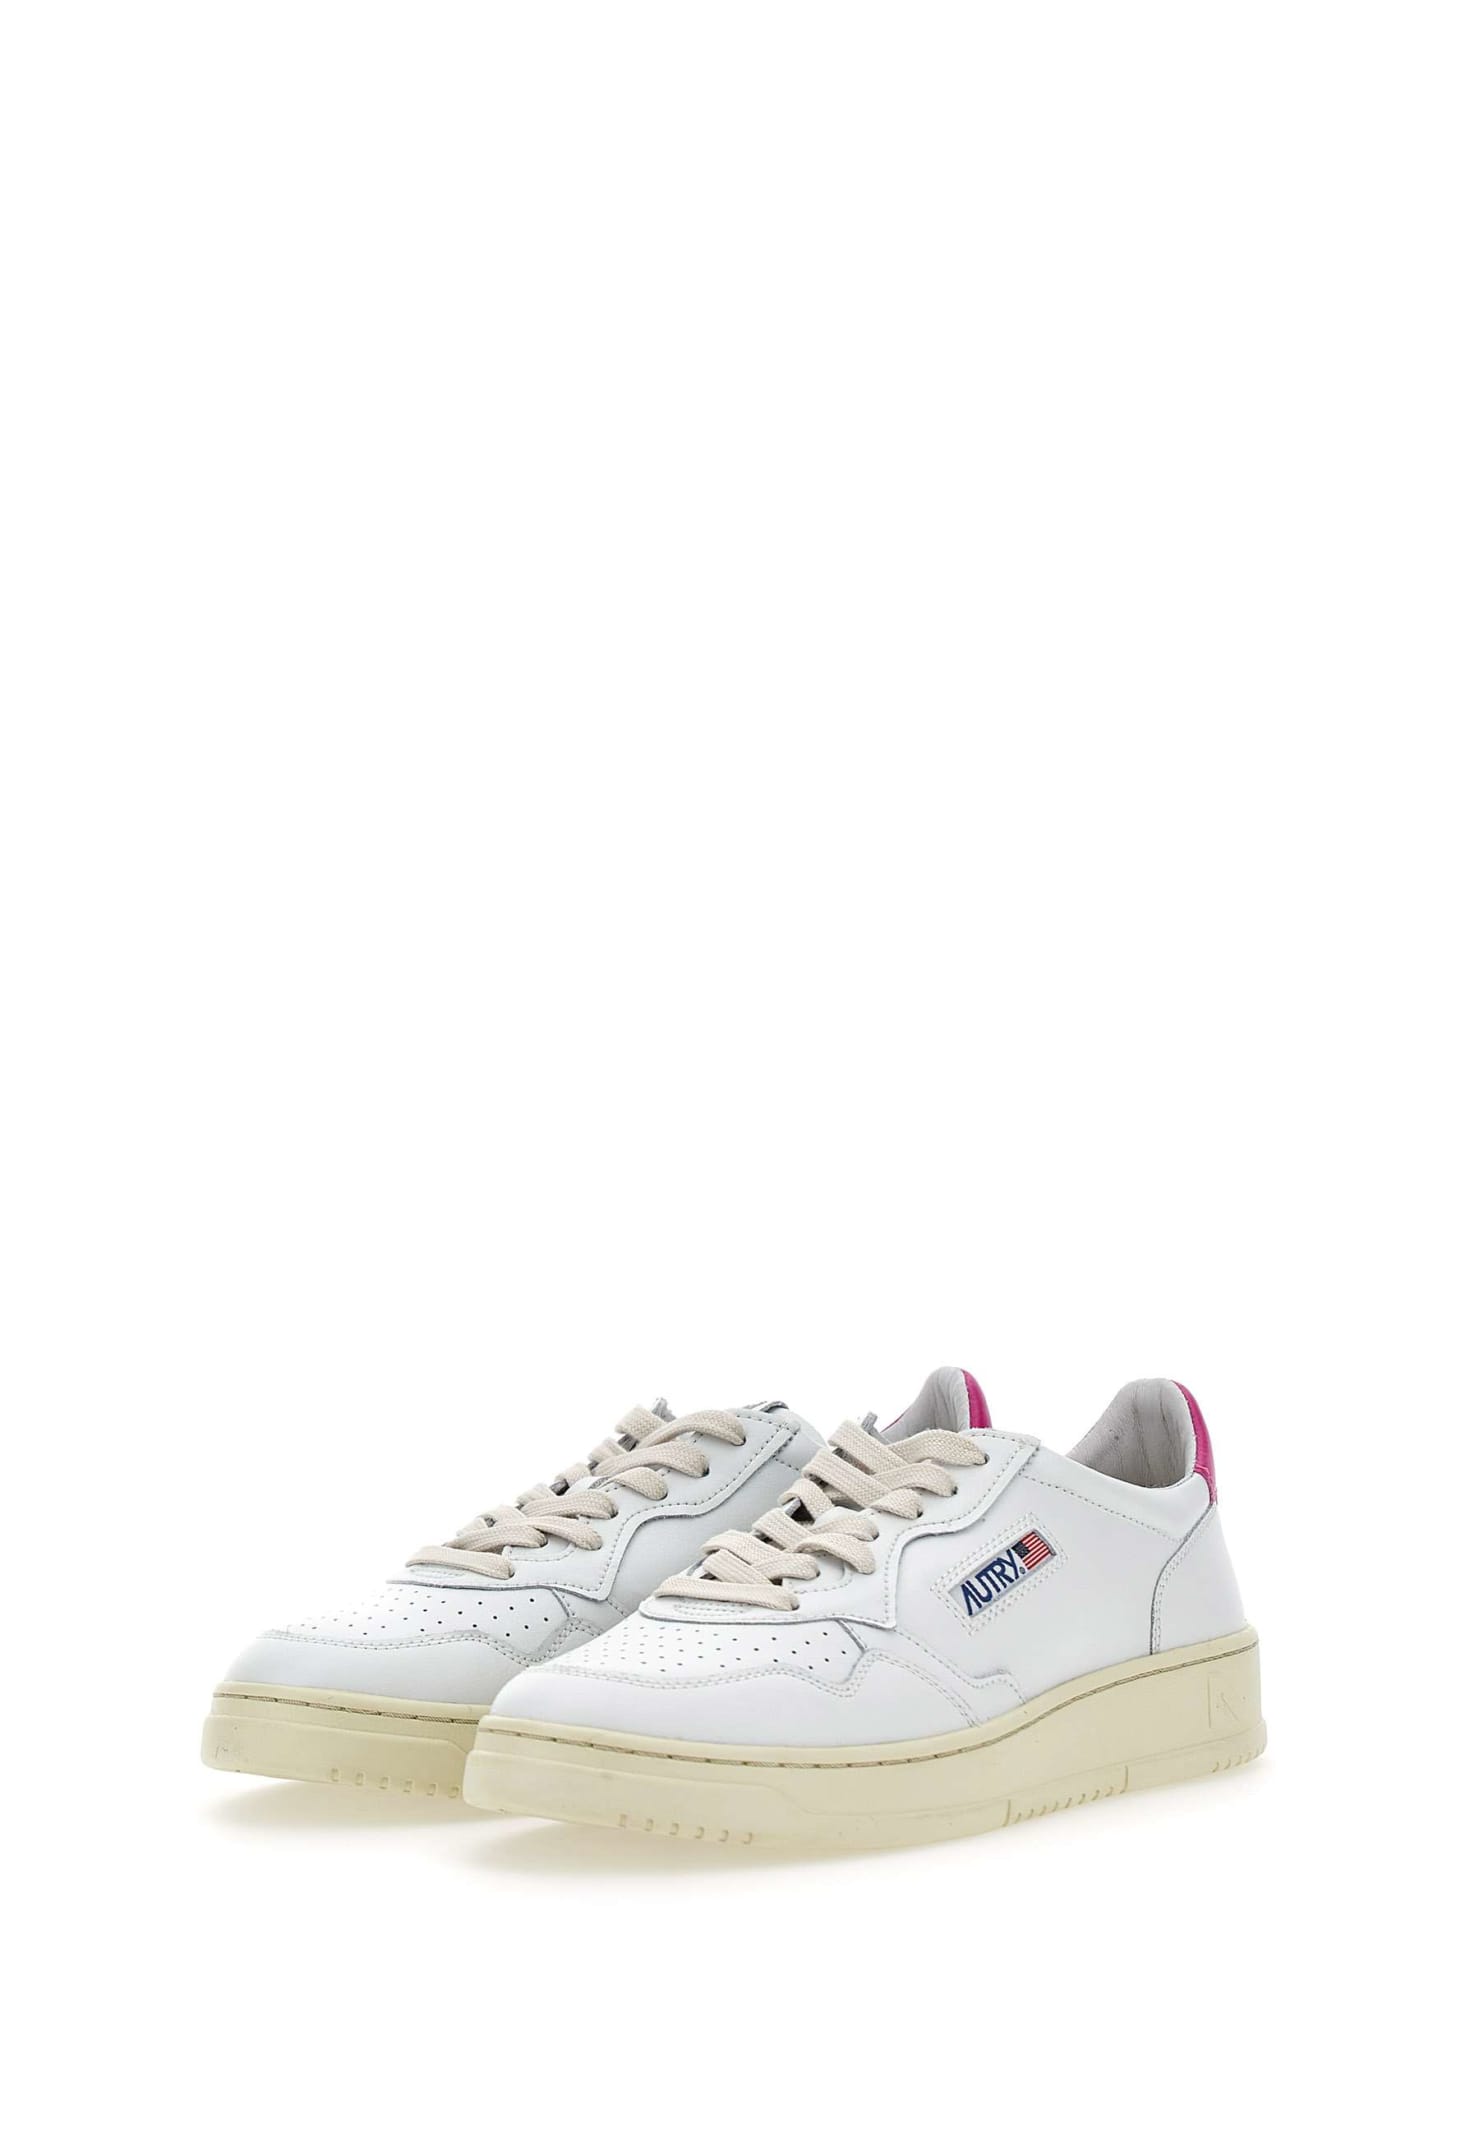 Shop Autry Ll42 Leather Sneakers In White/fuchsia